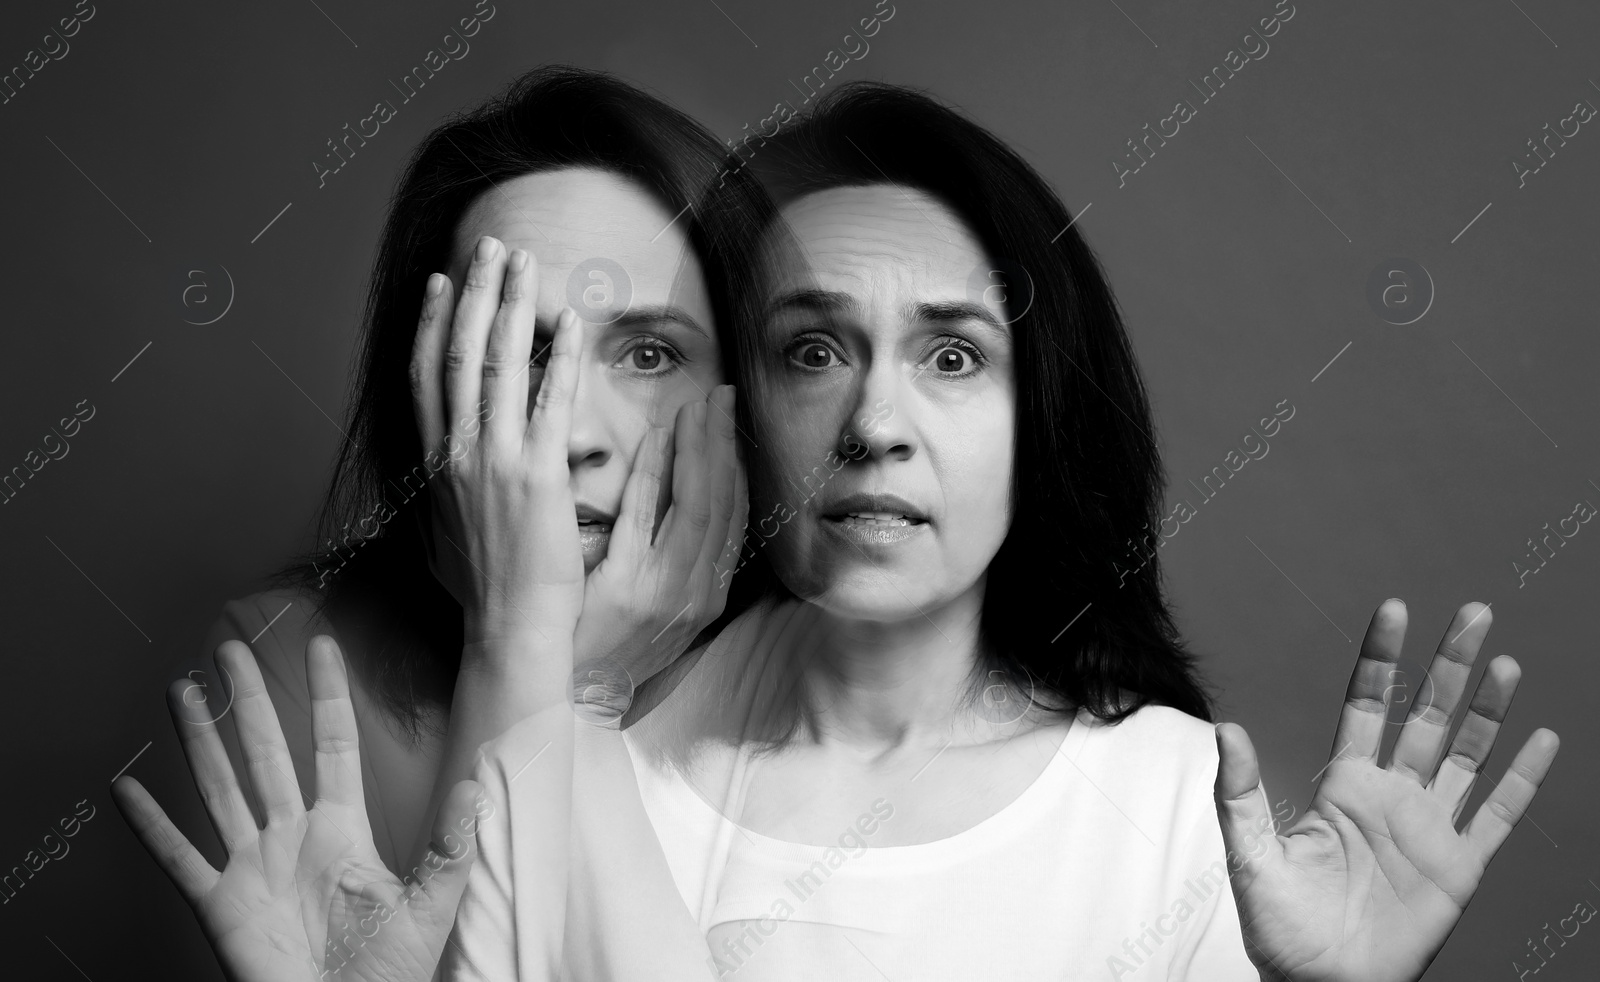 Image of Suffering from hallucinations. Double exposure with photos of woman on dark background, black and white effect